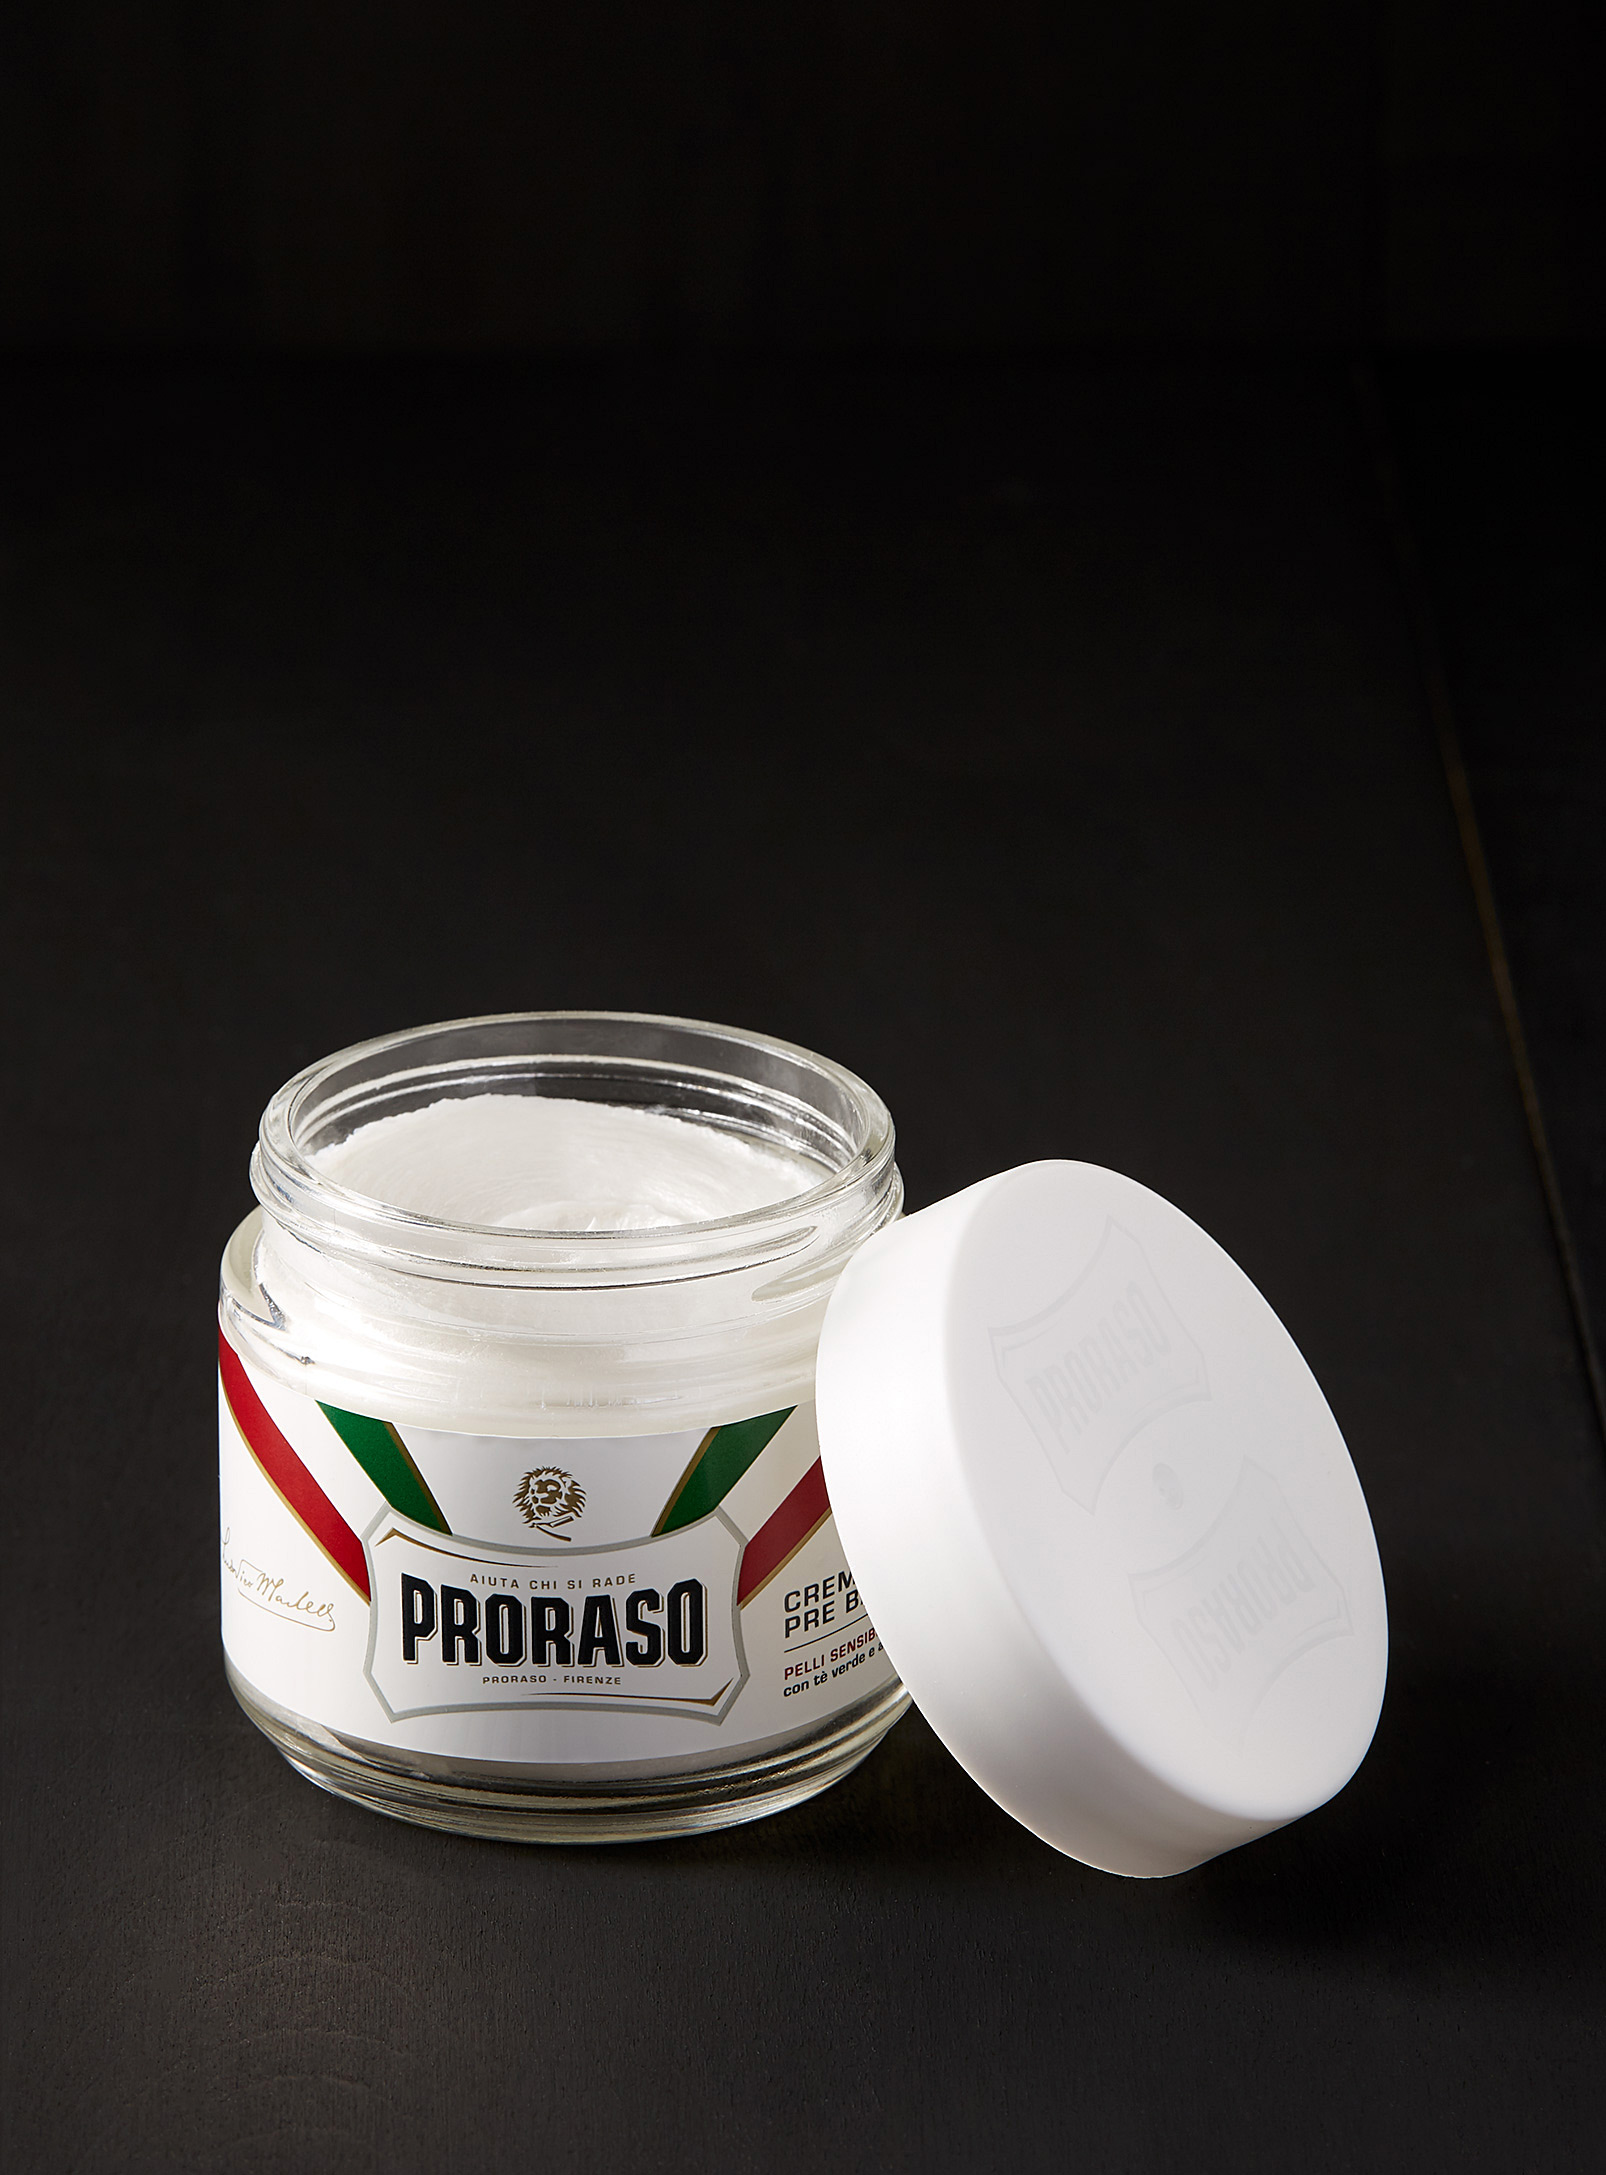 Proraso - Green tea and oatmeal before/after shave cream